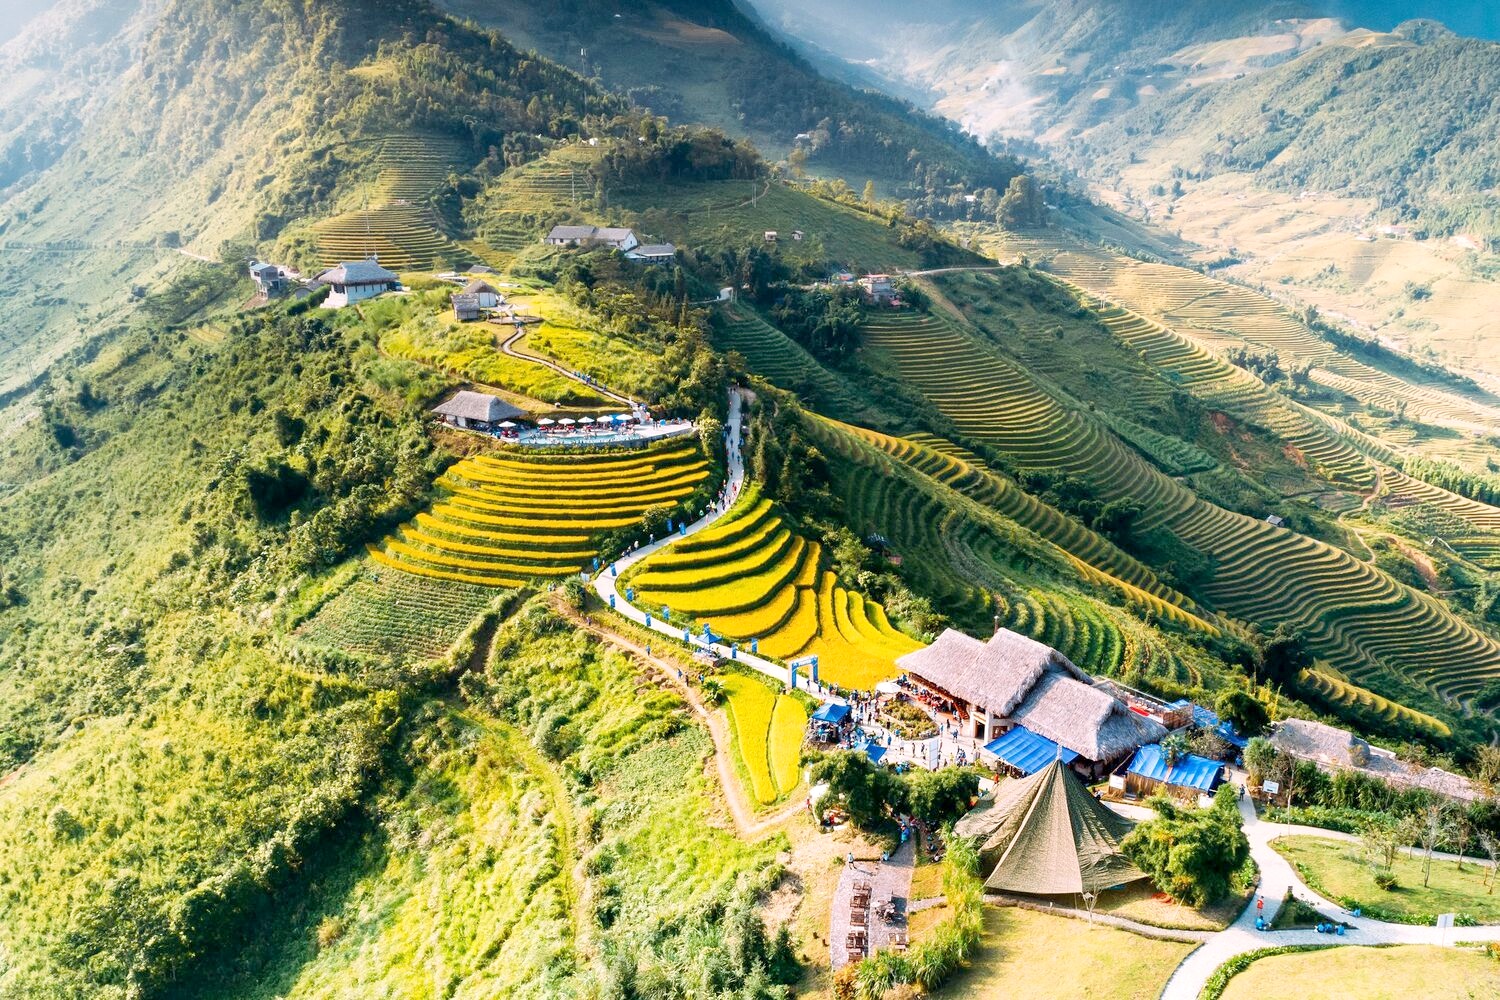 This supplied photo shows a bird’s-eye view of terraced rice fields in Sa Pa Town, Lao Cai Province, Vietnam.